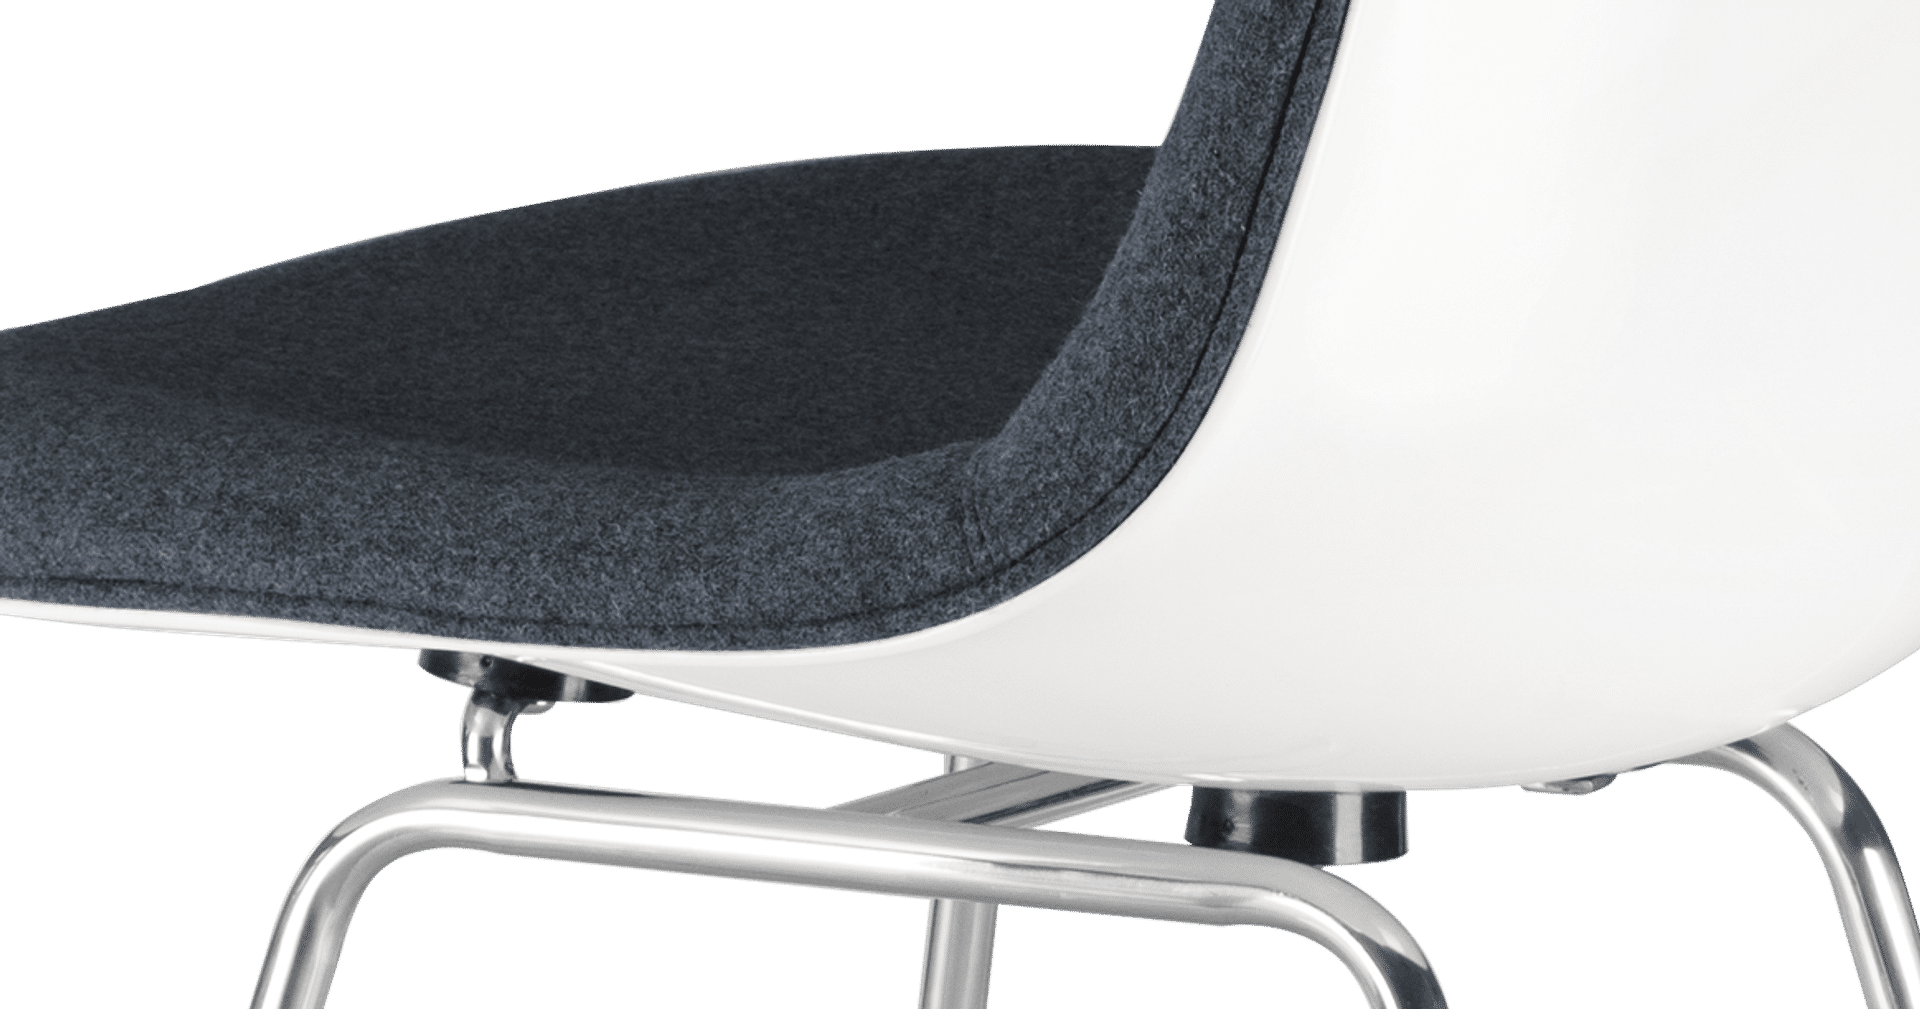 DSX Style Upholstered Dining Chair